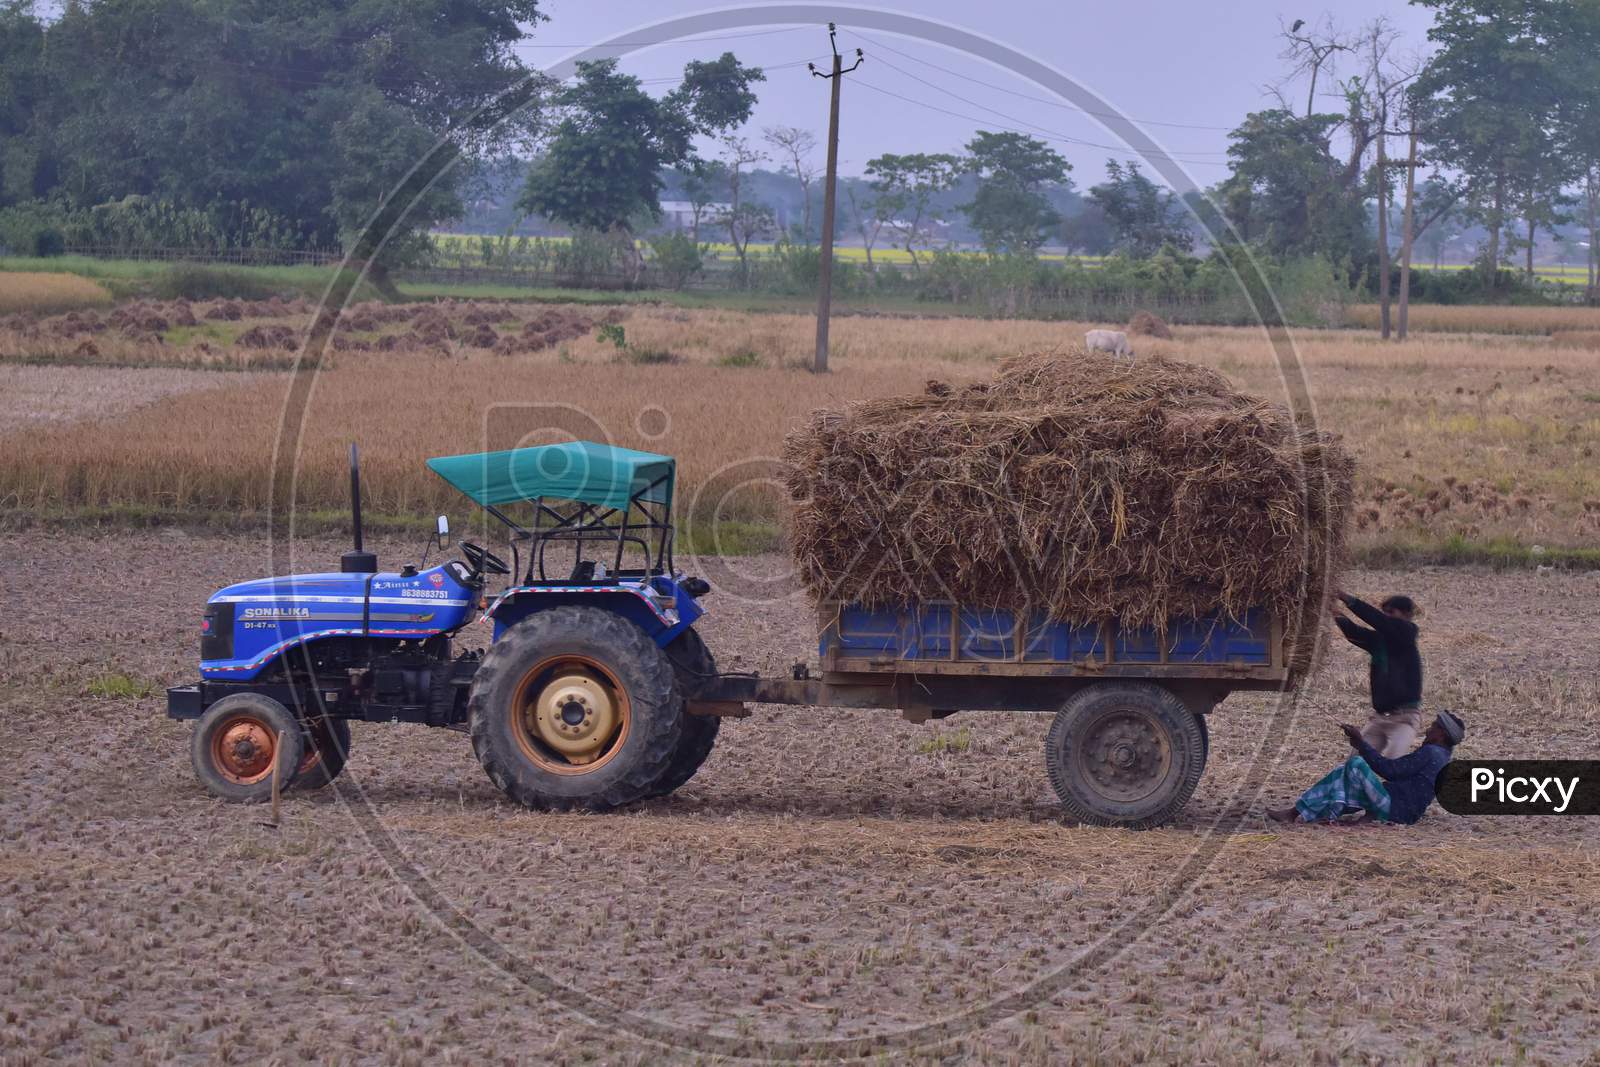 -Farmer  loading harvested rice paddy on a tractor   at Mayong village in Morigaon District of Assam on Dec 6,2020